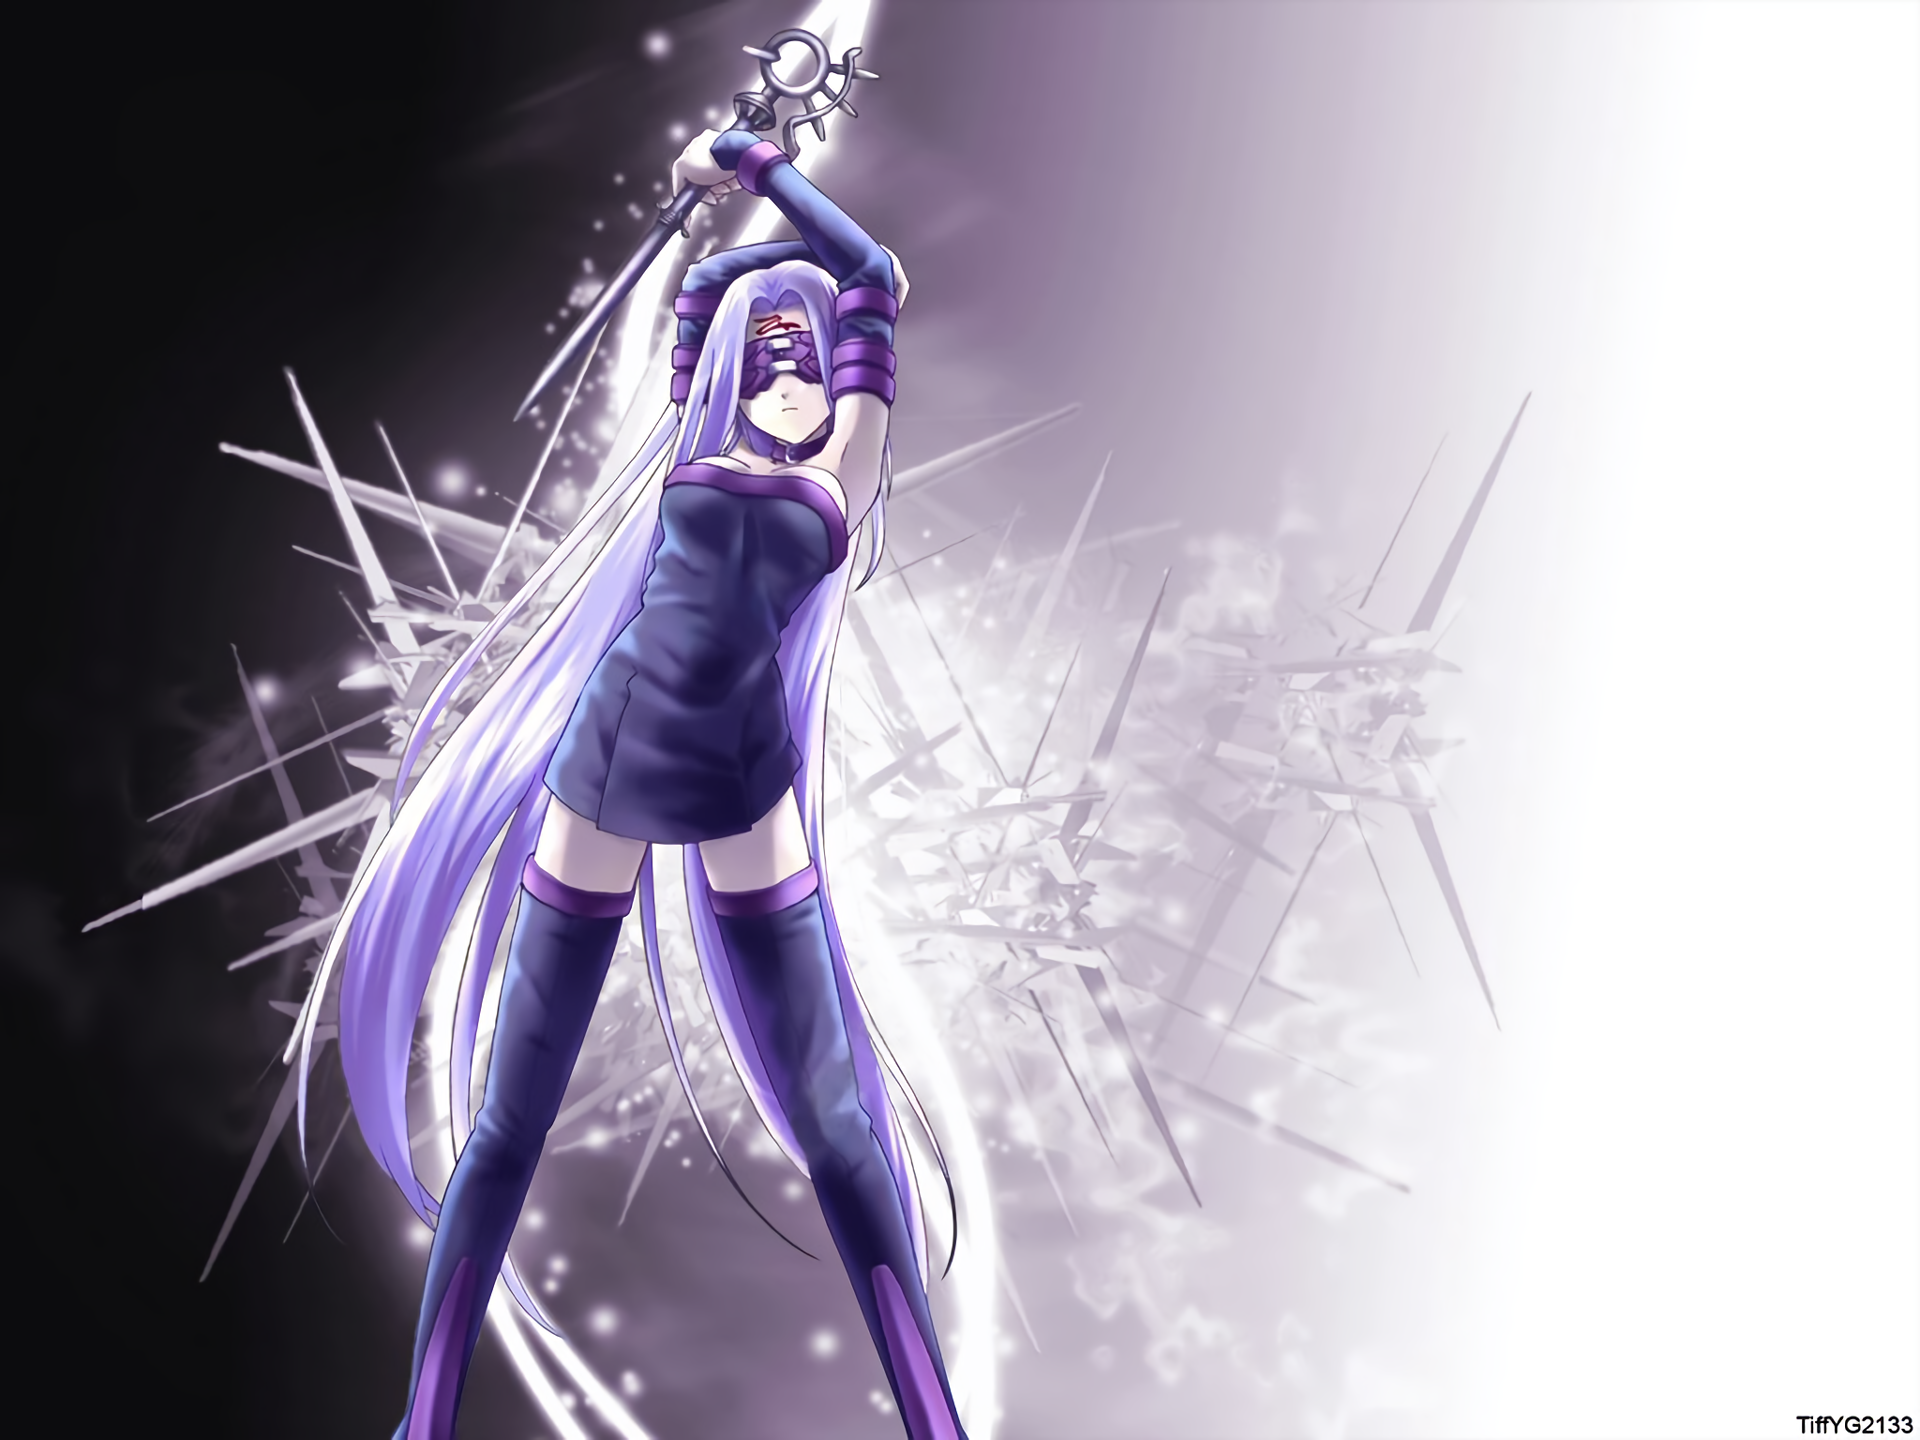 Blindfolded Rider from Fate/stay night in black dress and boots. Purple hair with a weapon.